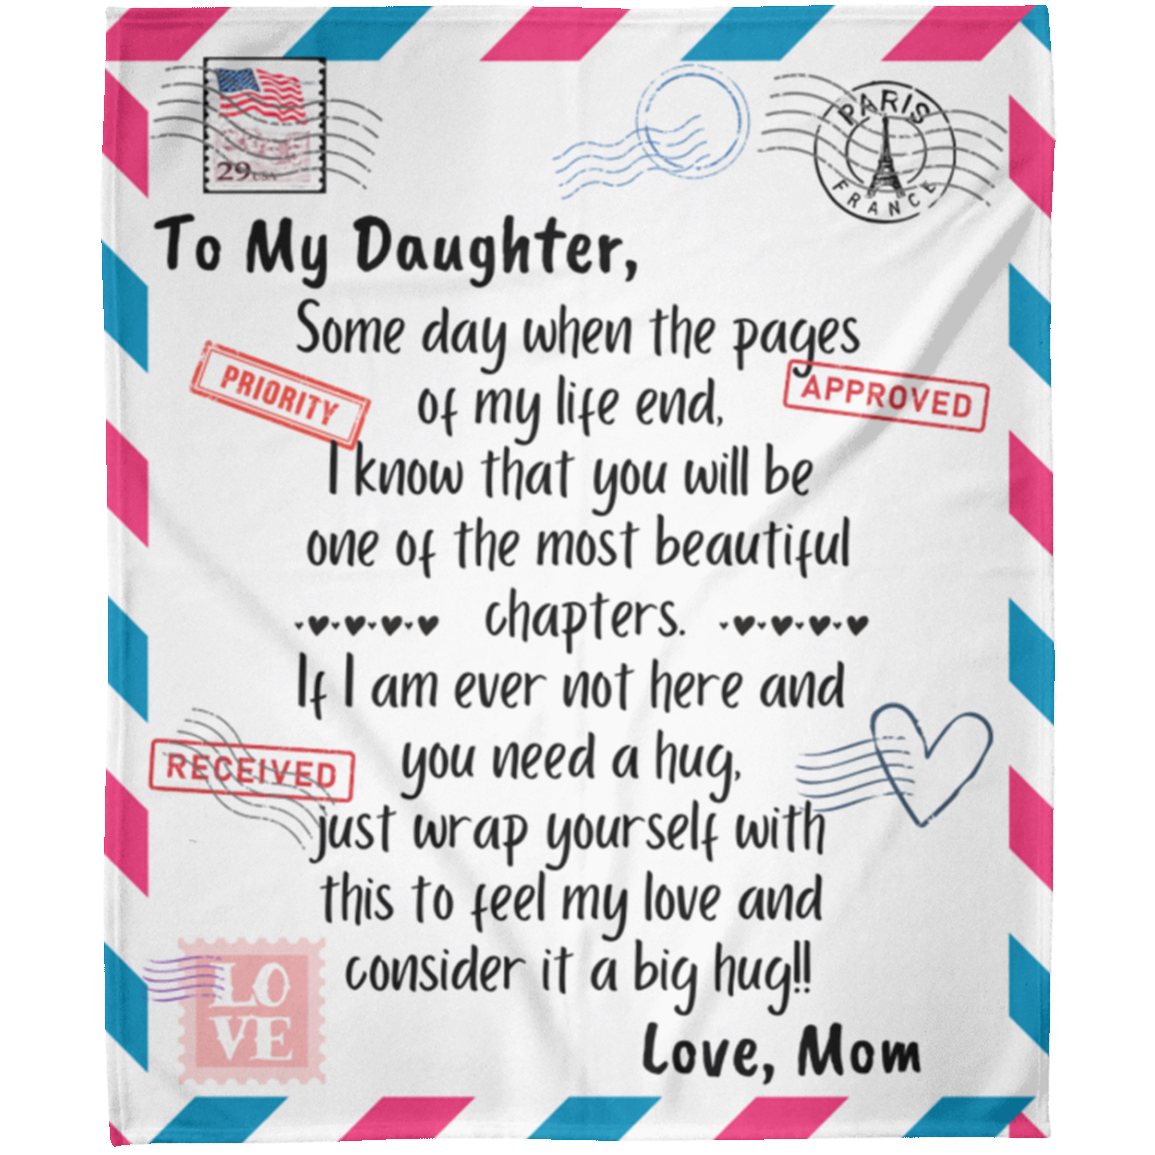 Daughter from Mom/Pages - Cozy Fleece Blanket (50x60)